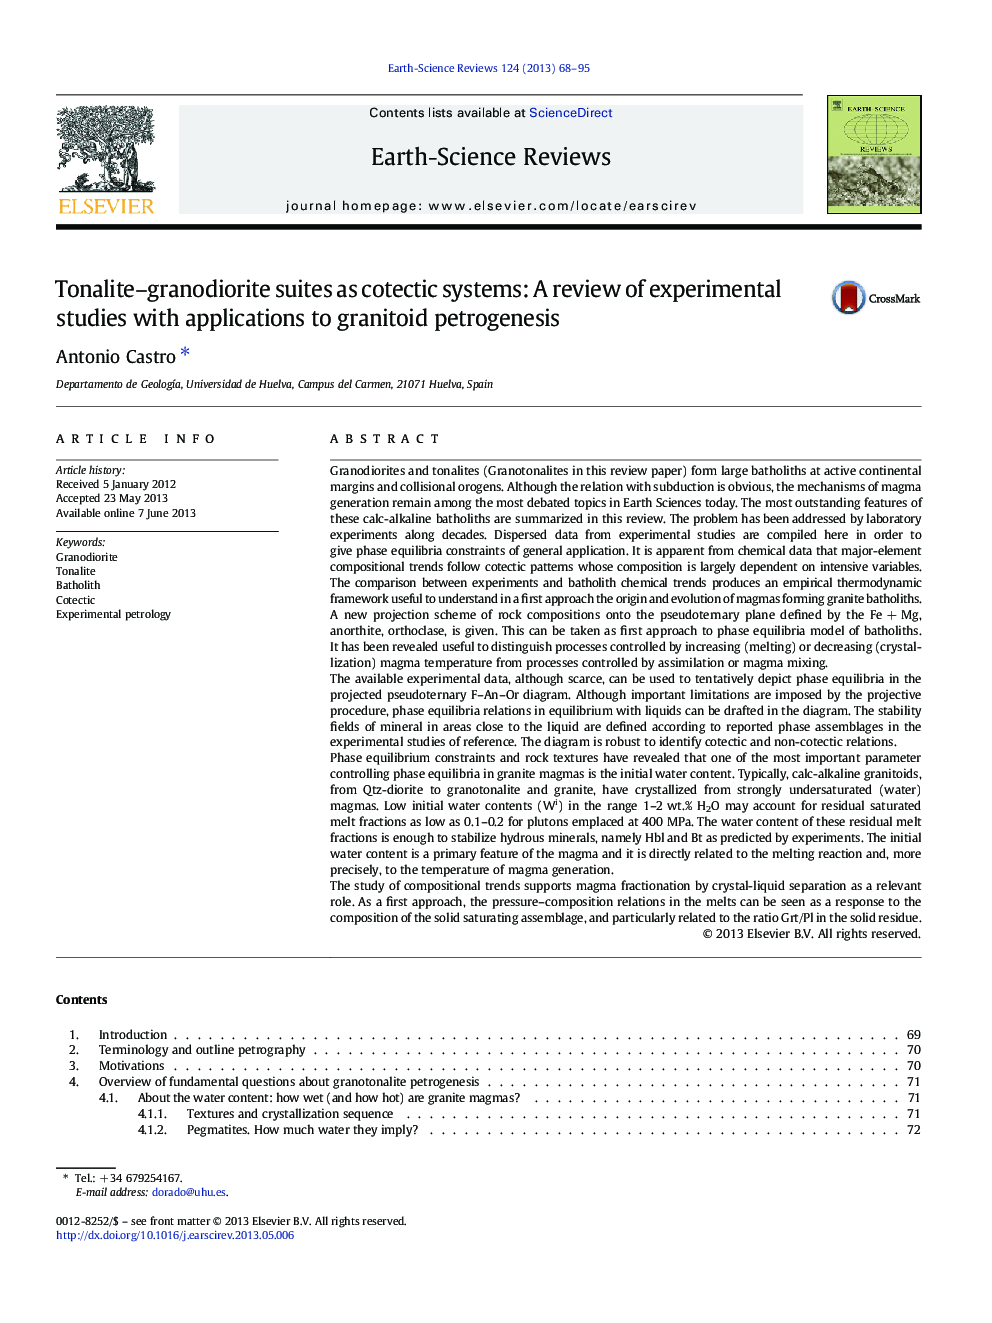 Tonalite–granodiorite suites as cotectic systems: A review of experimental studies with applications to granitoid petrogenesis